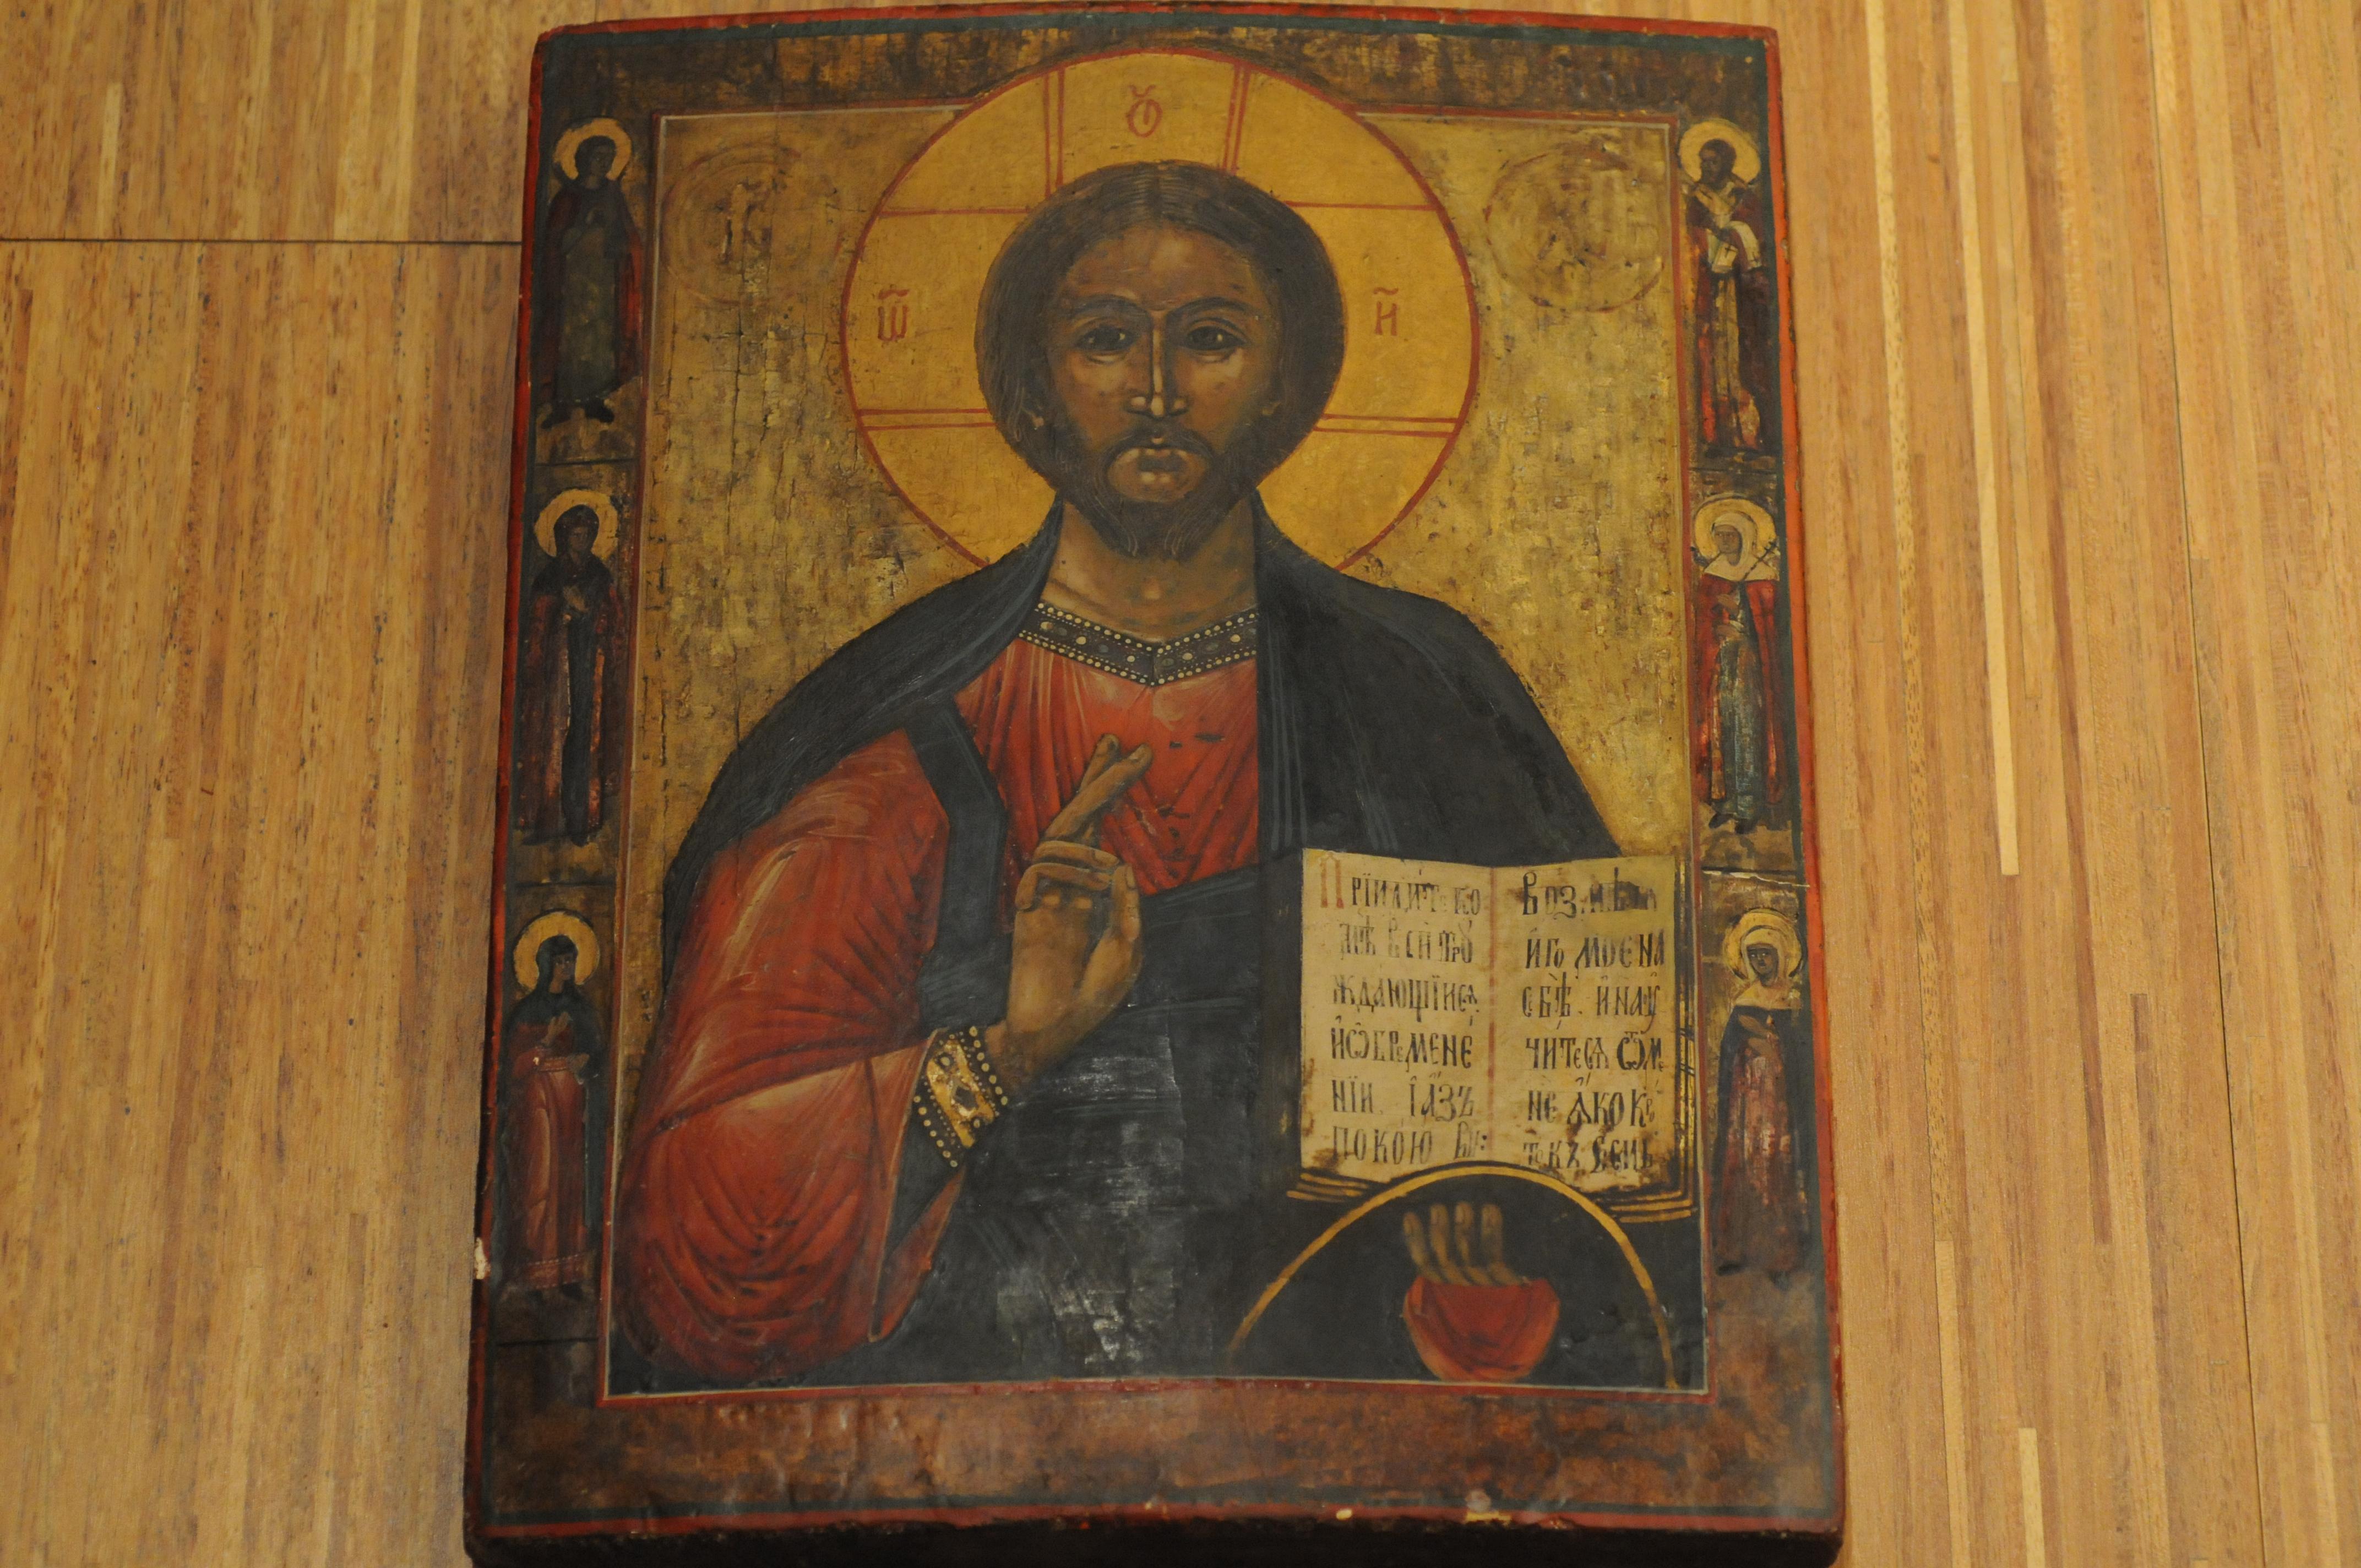 Unknown Figurative Painting - Antique Russian Icon - late 18th century, ca. 30 x 38 cm (15 x 12 in)